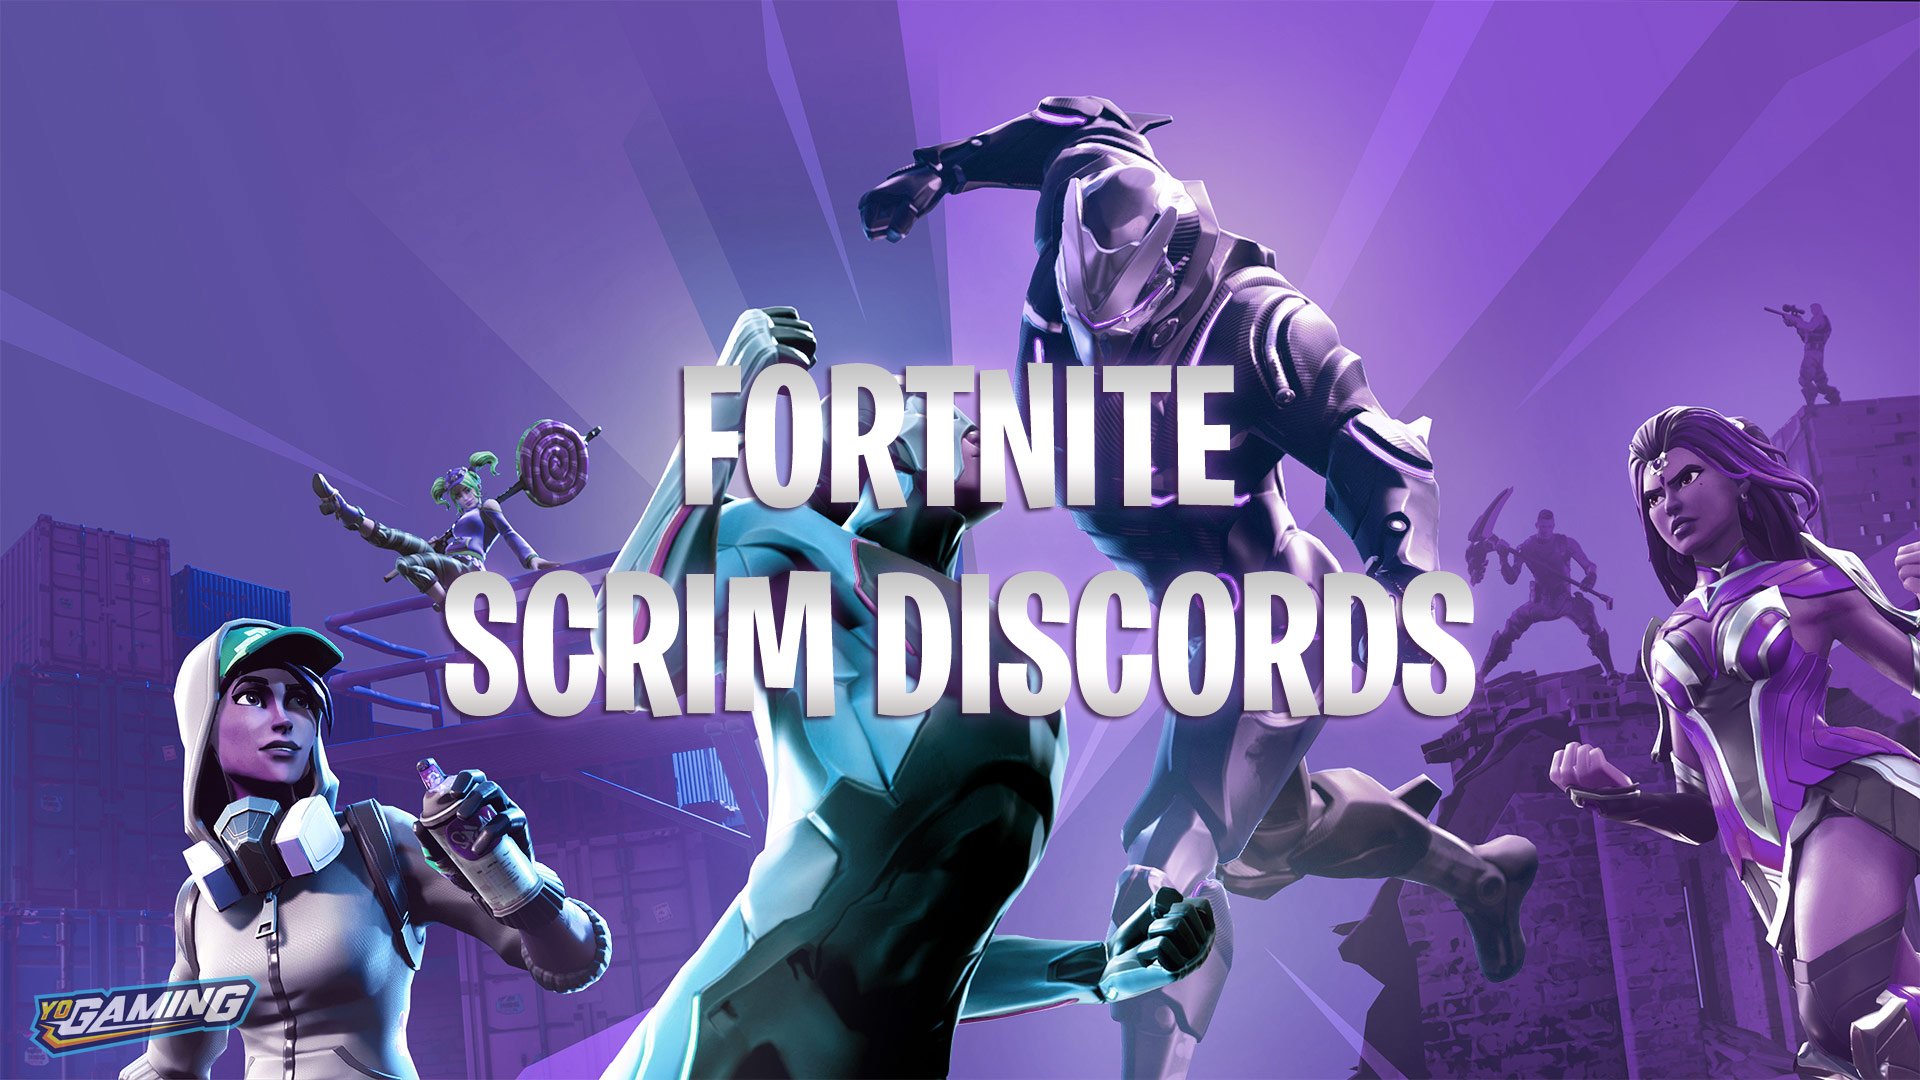 fortnite discords with pro scrims snipes solo duo squad updated april 2019 - prosettings fortnite ninja